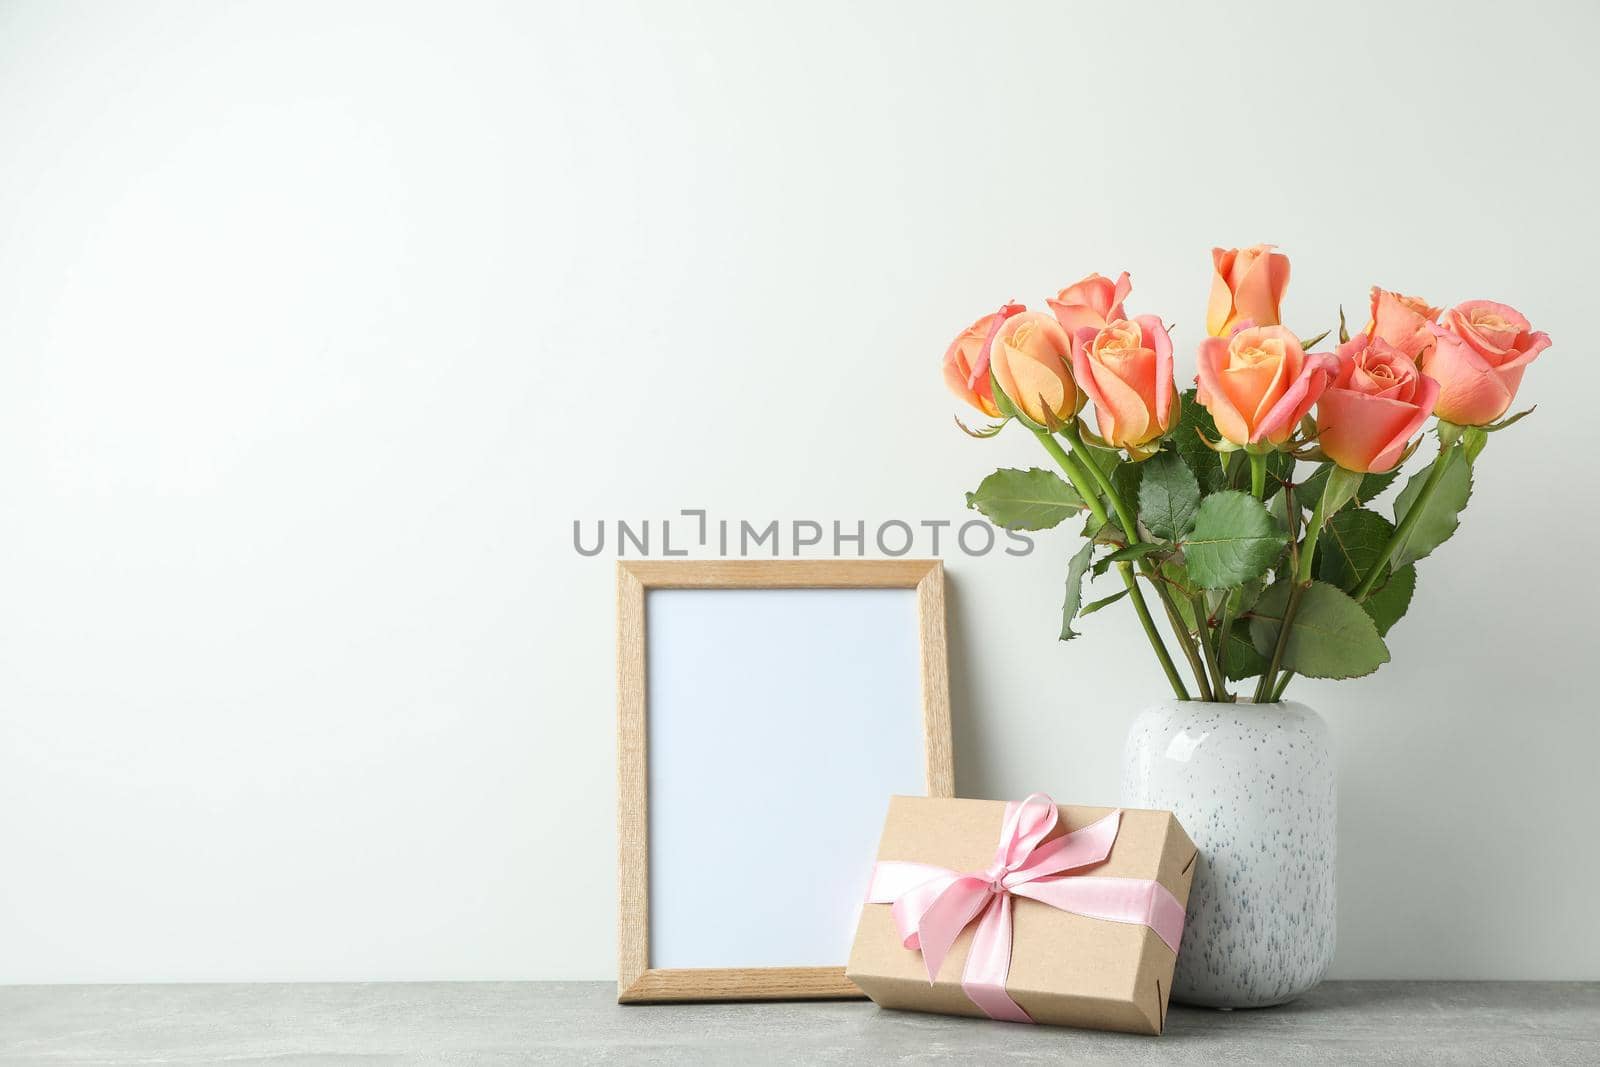 Vase with roses, gift and empty frame on grey table against white background, space for text by AtlasCompany